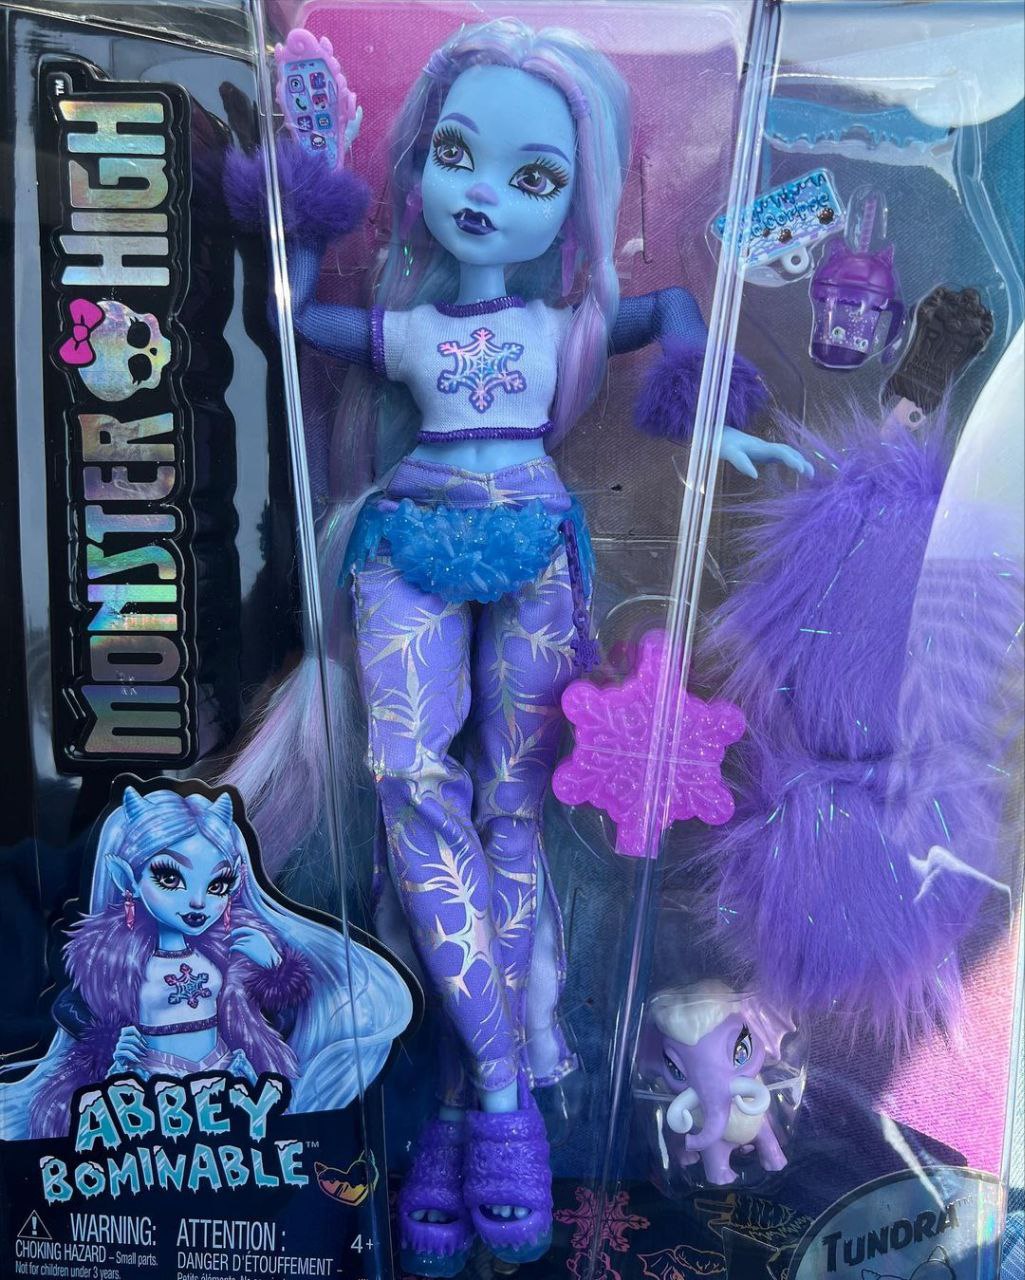 Monster High's G3 Abbey Bominable--A Guest Review!